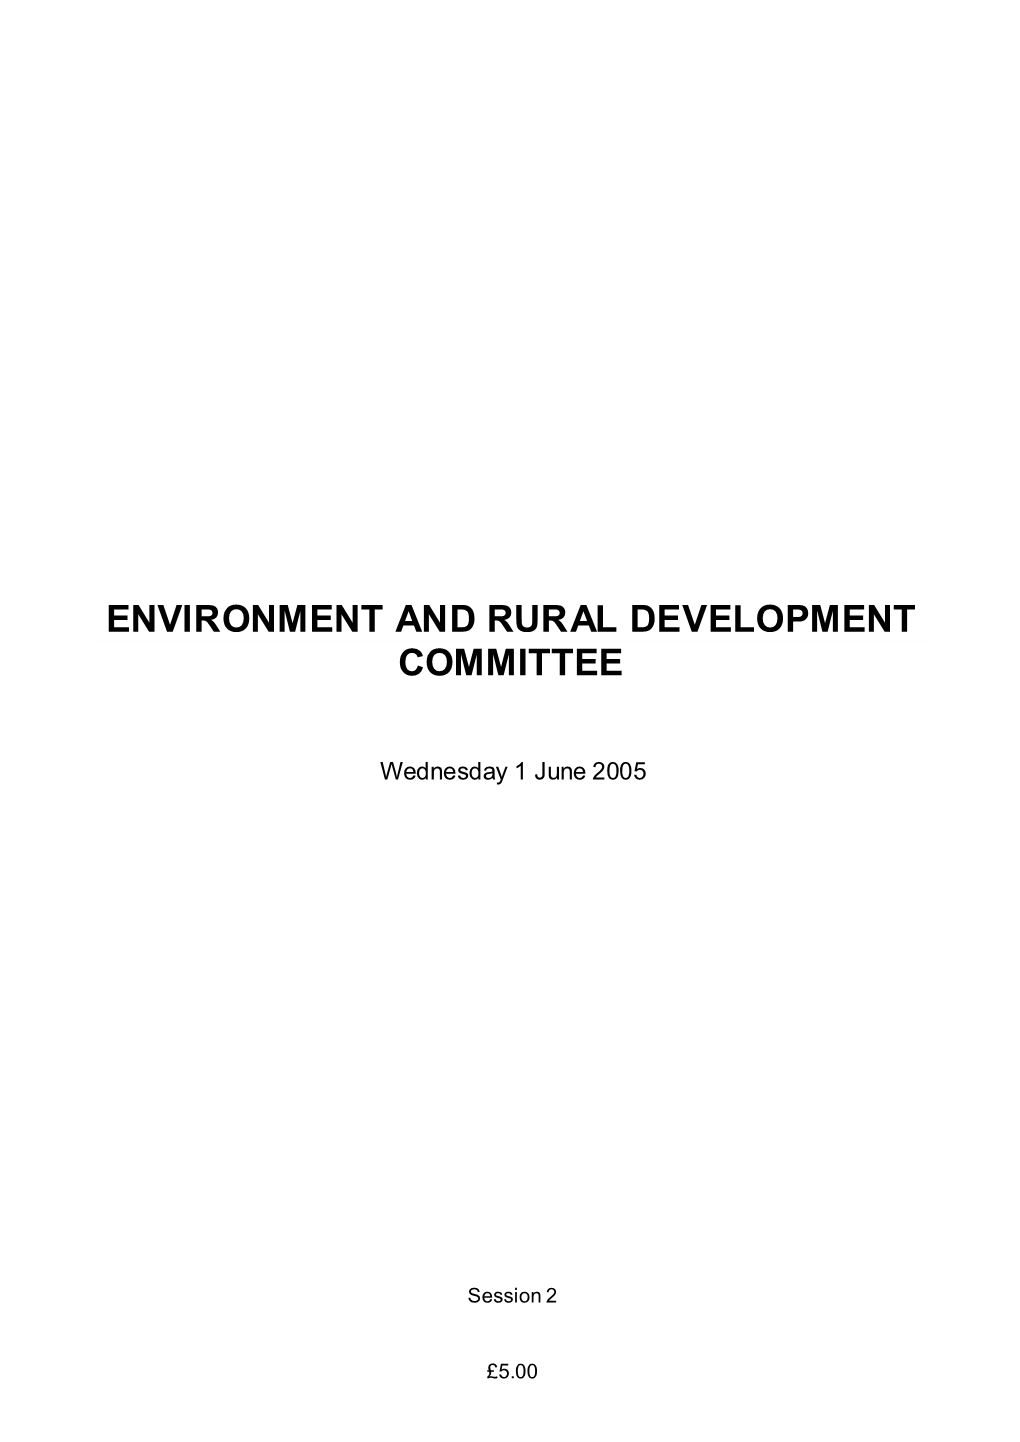 Environment and Rural Development Committee